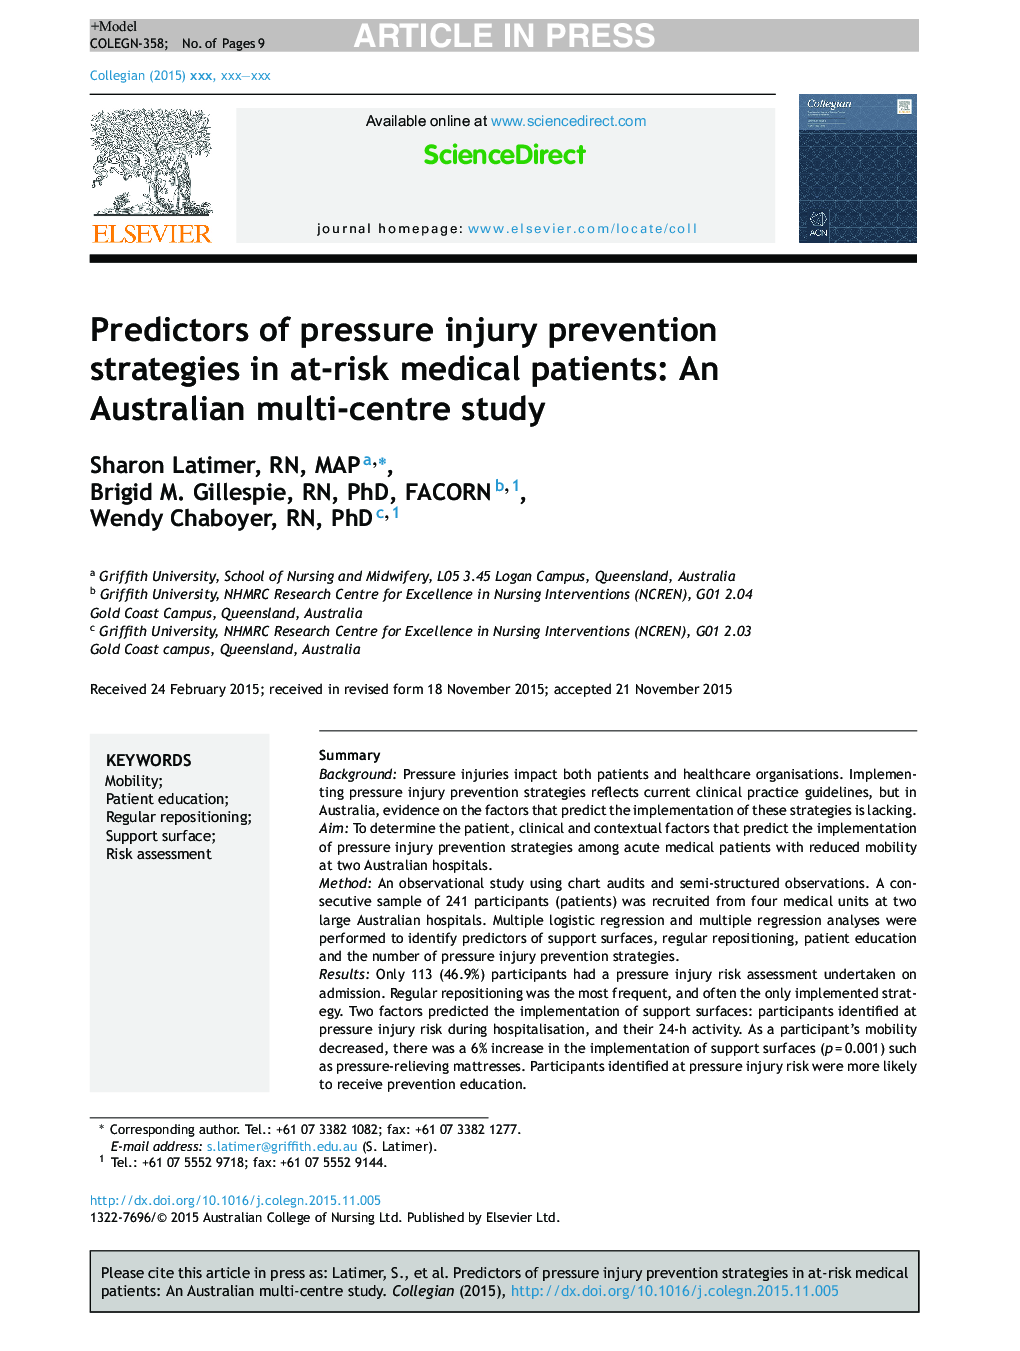 Predictors of pressure injury prevention strategies in at-risk medical patients: An Australian multi-centre study